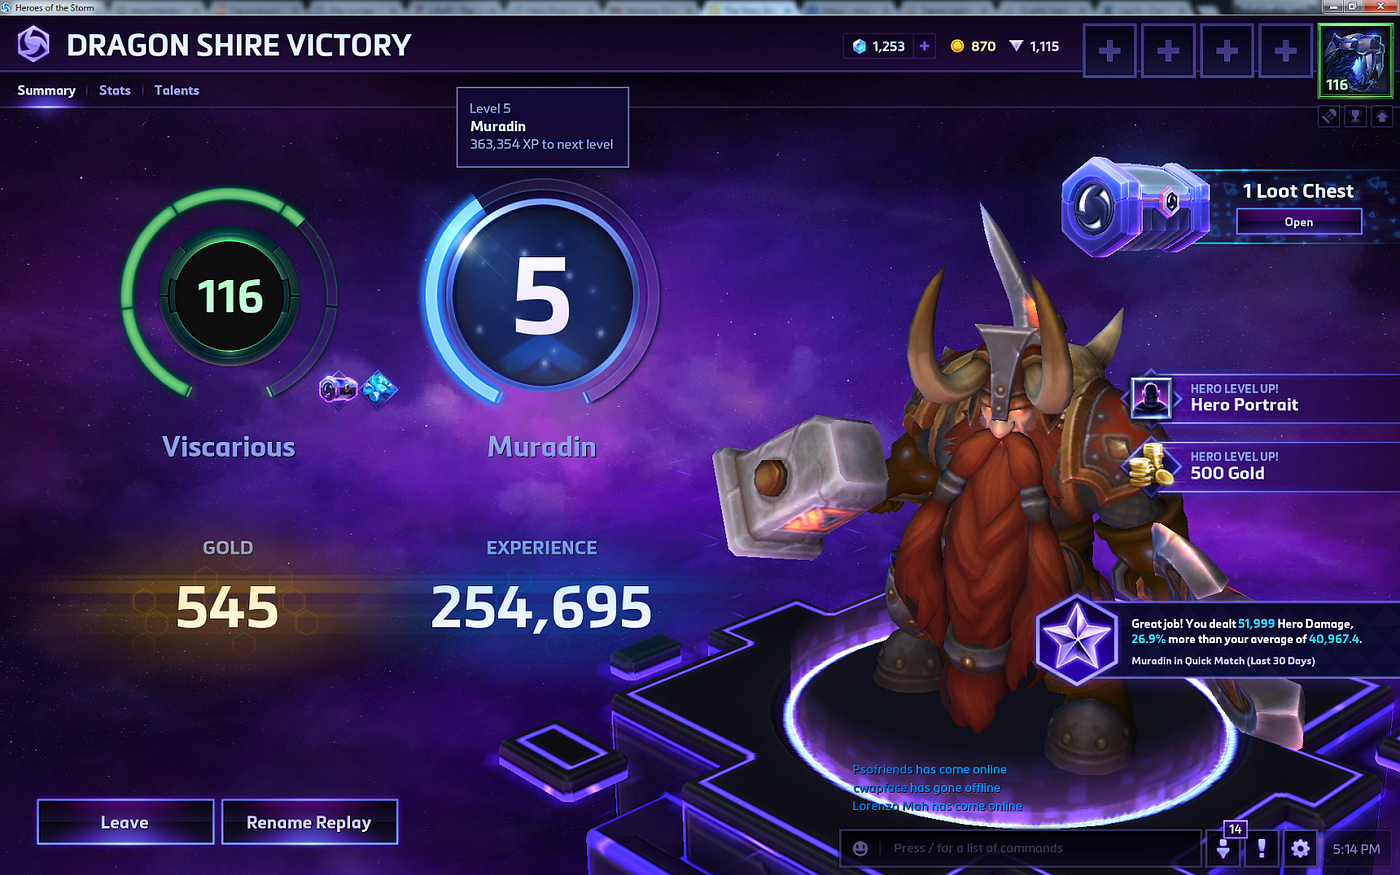 Heroes of the Storm News & HotS Updates - MMO-Champion